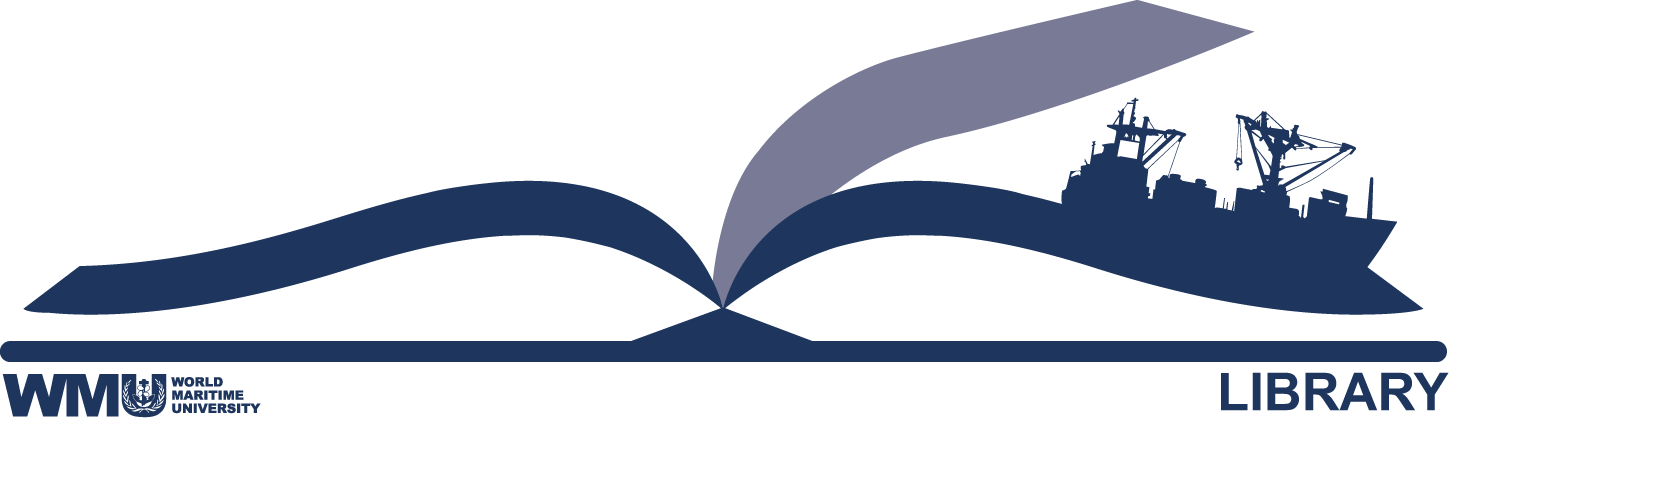 WMU library logo - Open book with ship sailing across